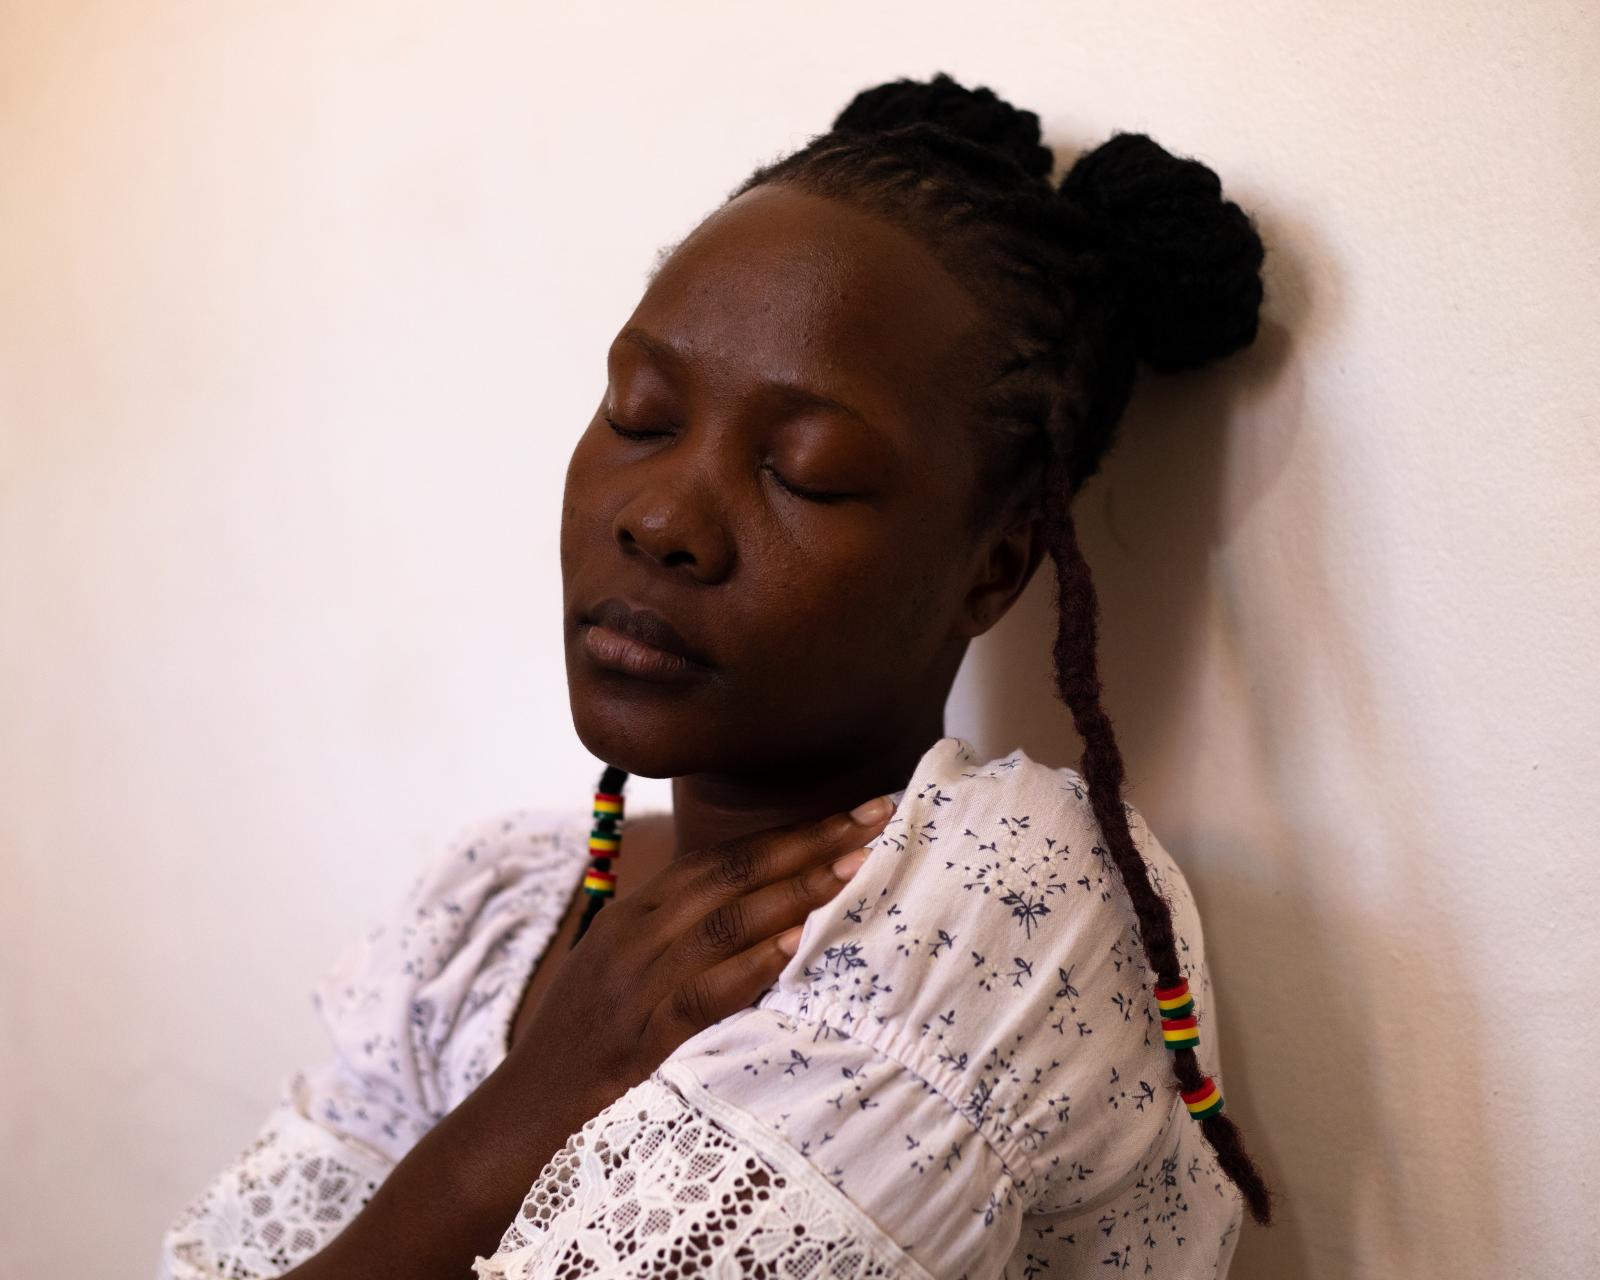 Image from Surviving Bery: A Girlhood Trauma | DeLovie Kwagala  - “I have had a truly tough life. My mum left home...